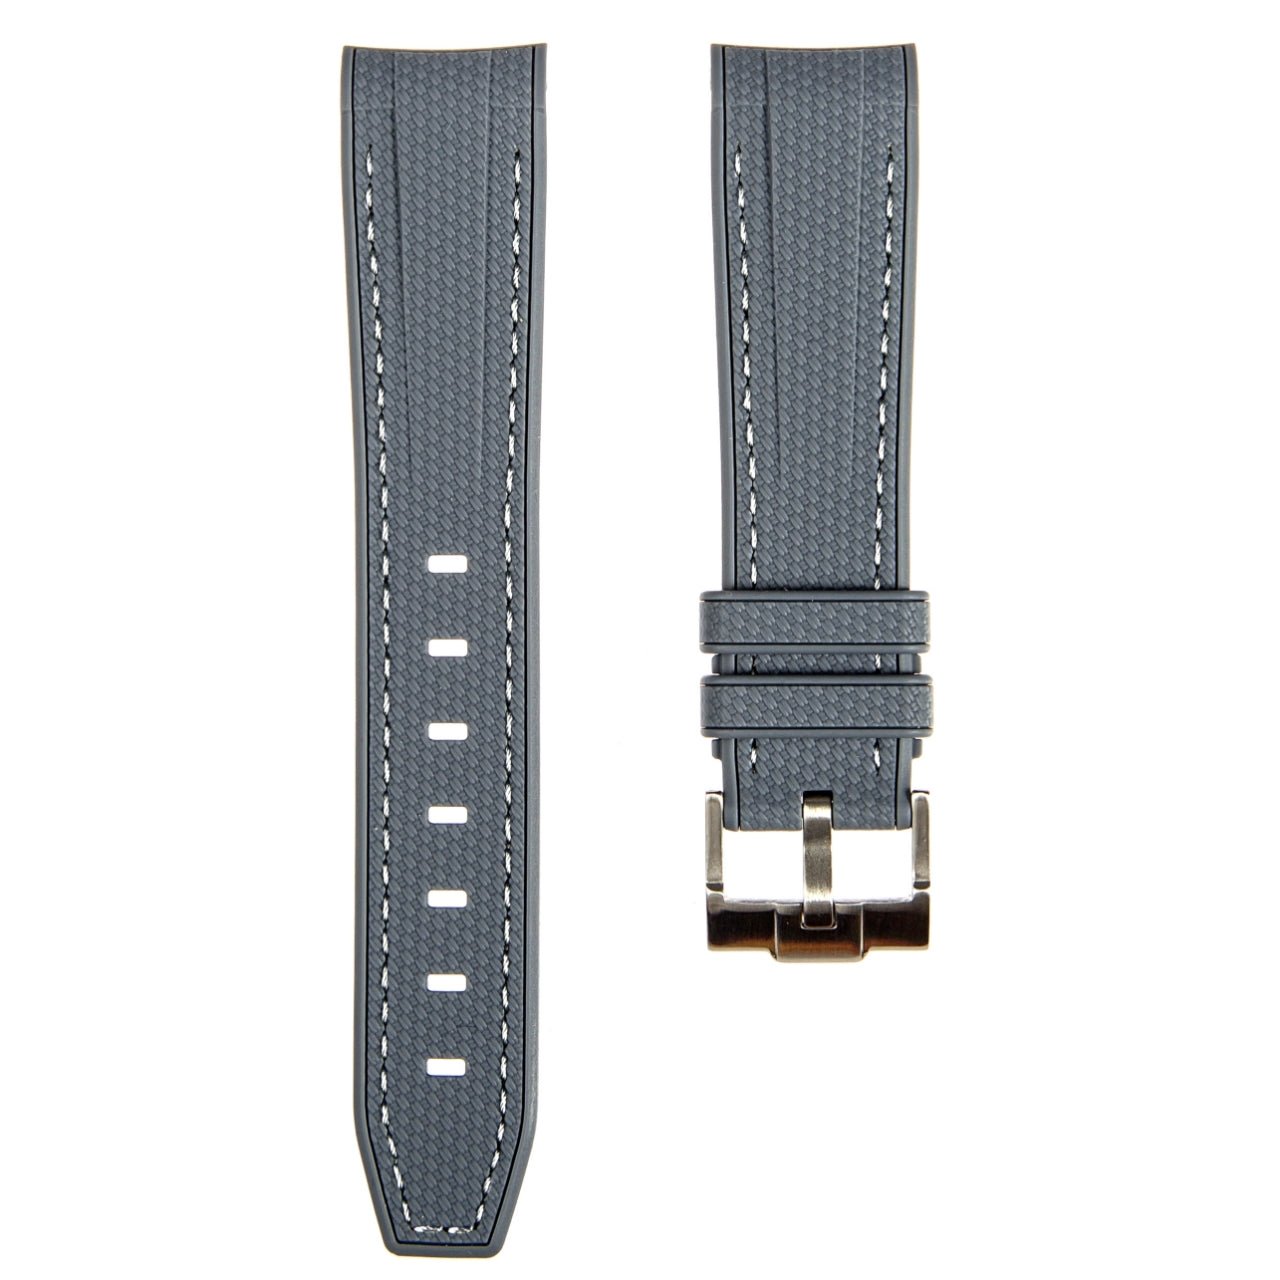 Textured Curved End Premium Silicone Strap – Compatible with Rolex Submariner – Grey with White Stitch (2405) -StrapSeeker